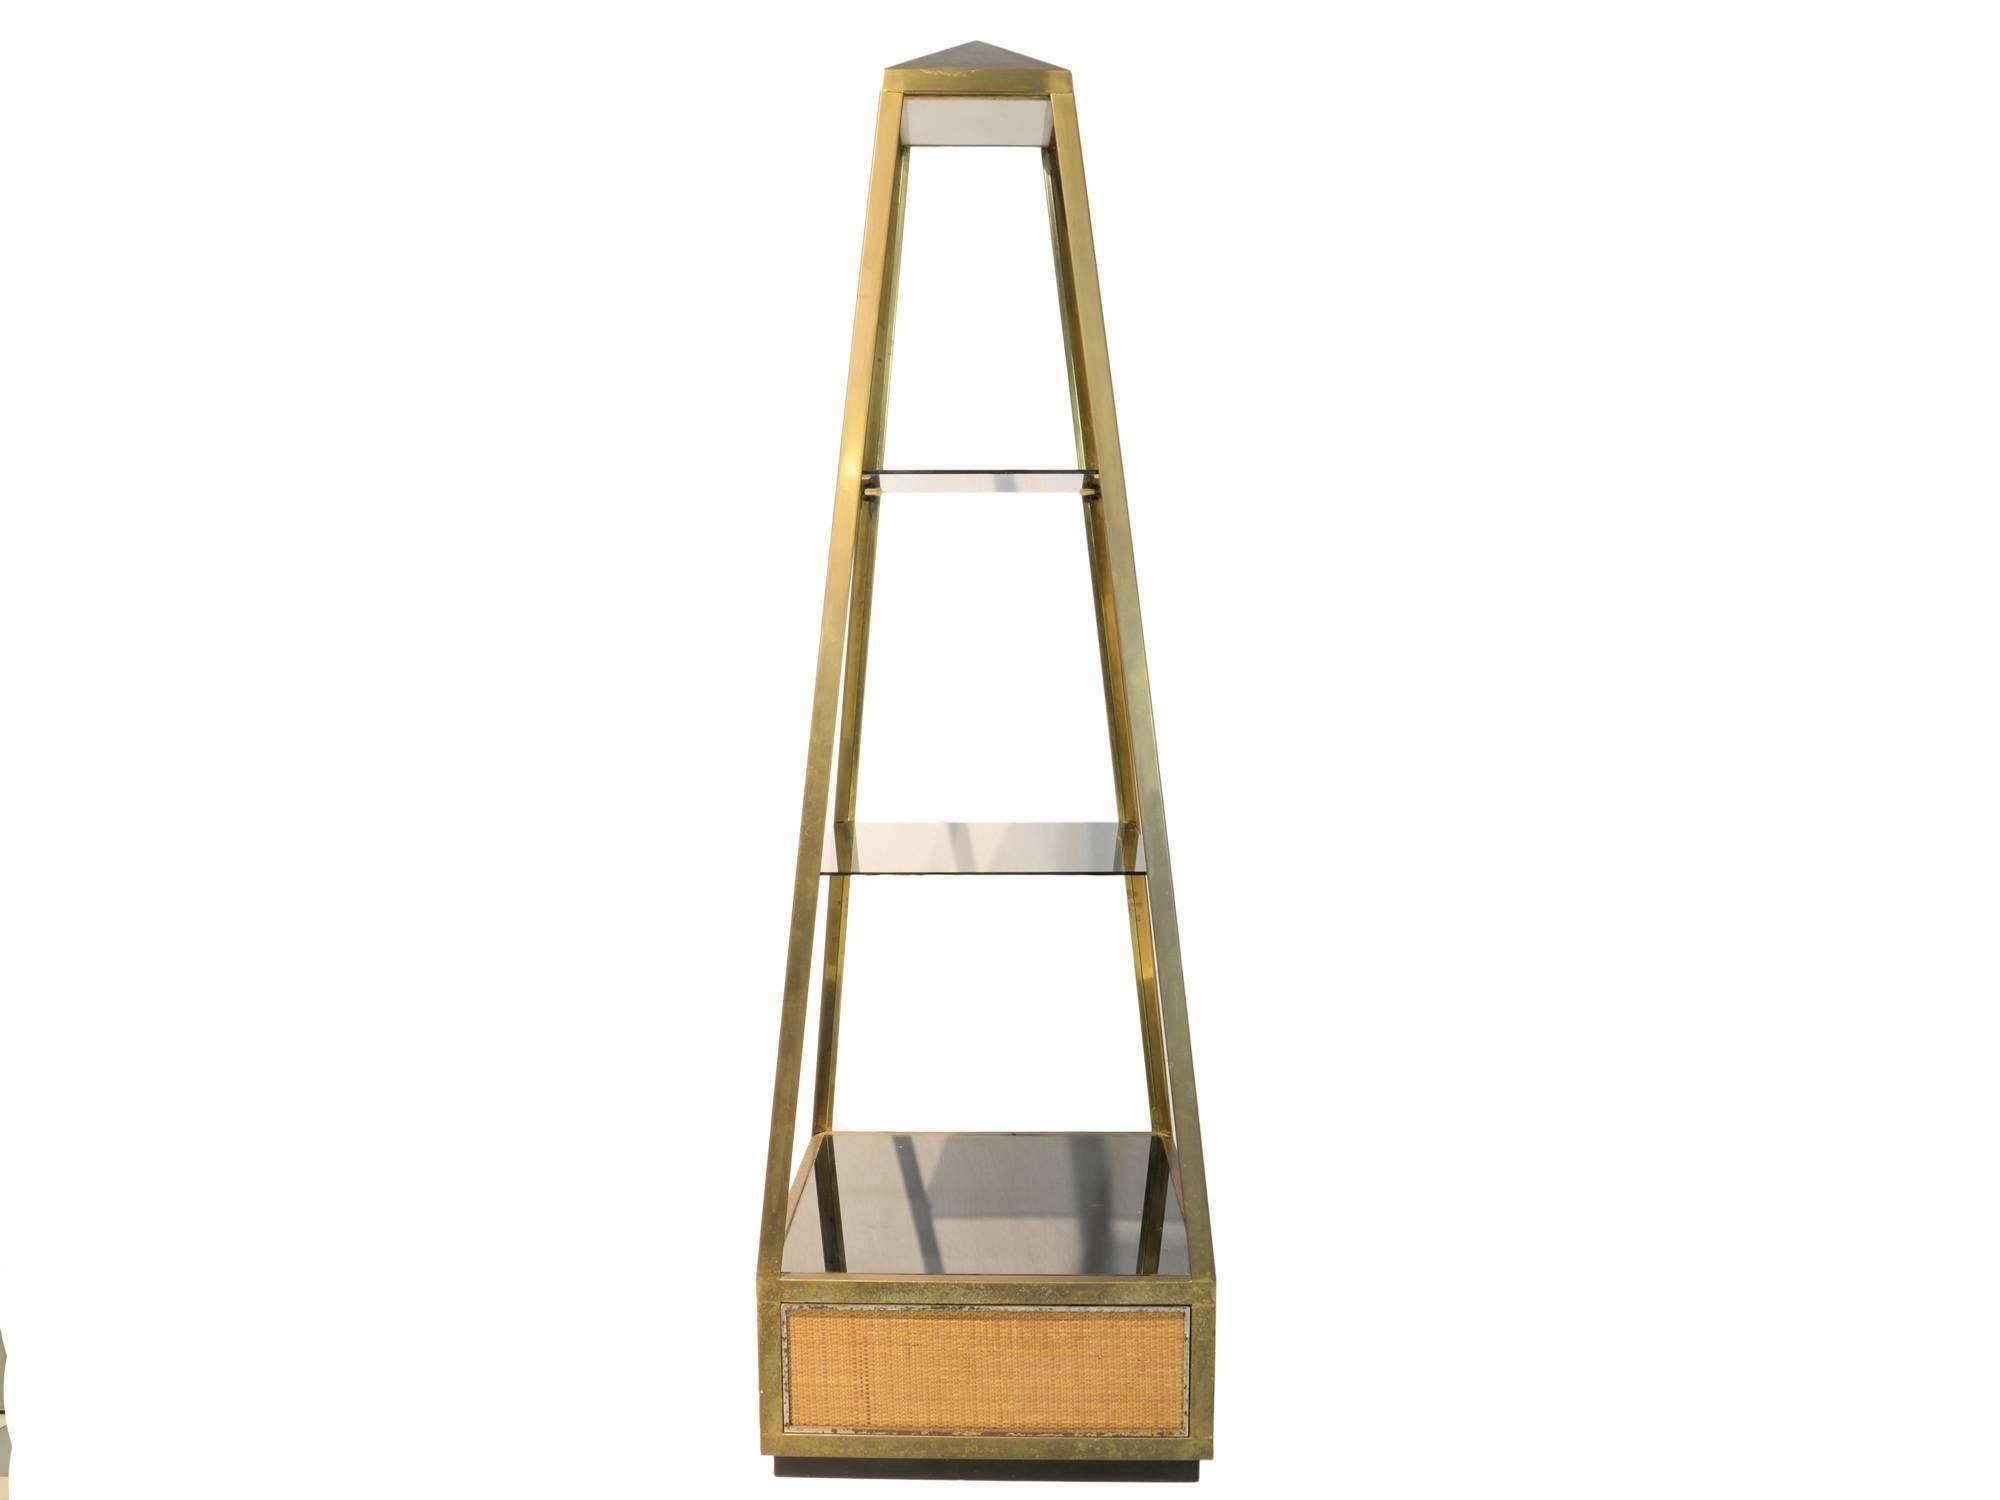 Willy Rizzo
Pair of stand with obelisk shape
Made of brass, glass, straw details
One is electrified and has a lamp hidden in the top of the obelisk
The second one can be electrified on request
France, circa 1980.
 